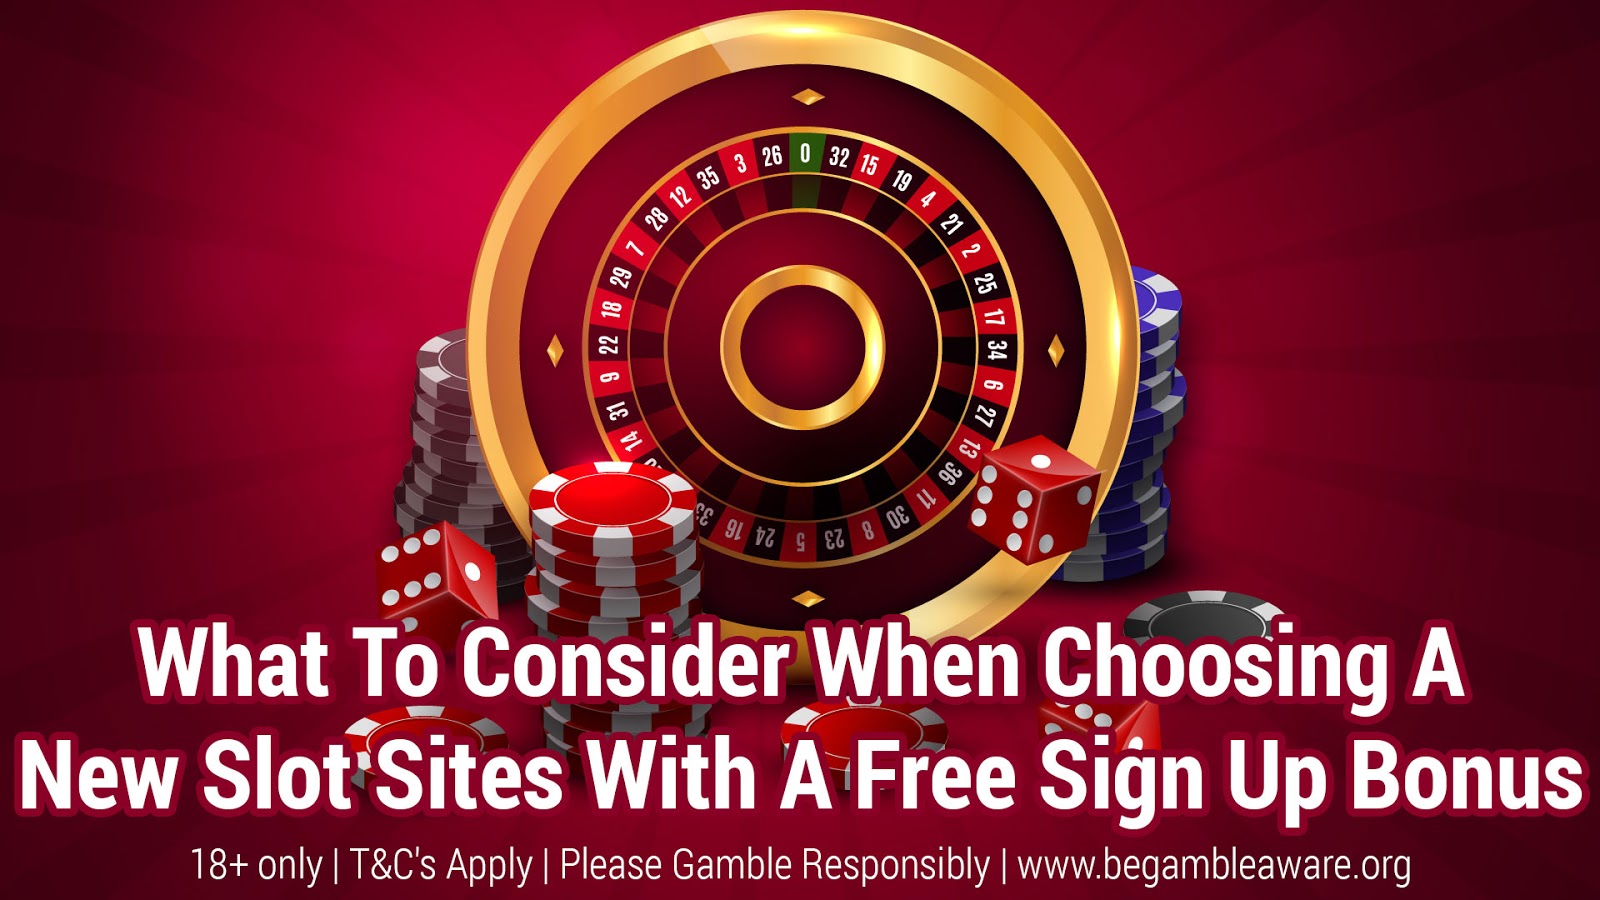 What To Consider When Choosing A New Slot Sites With A Free Sign Up Bonus